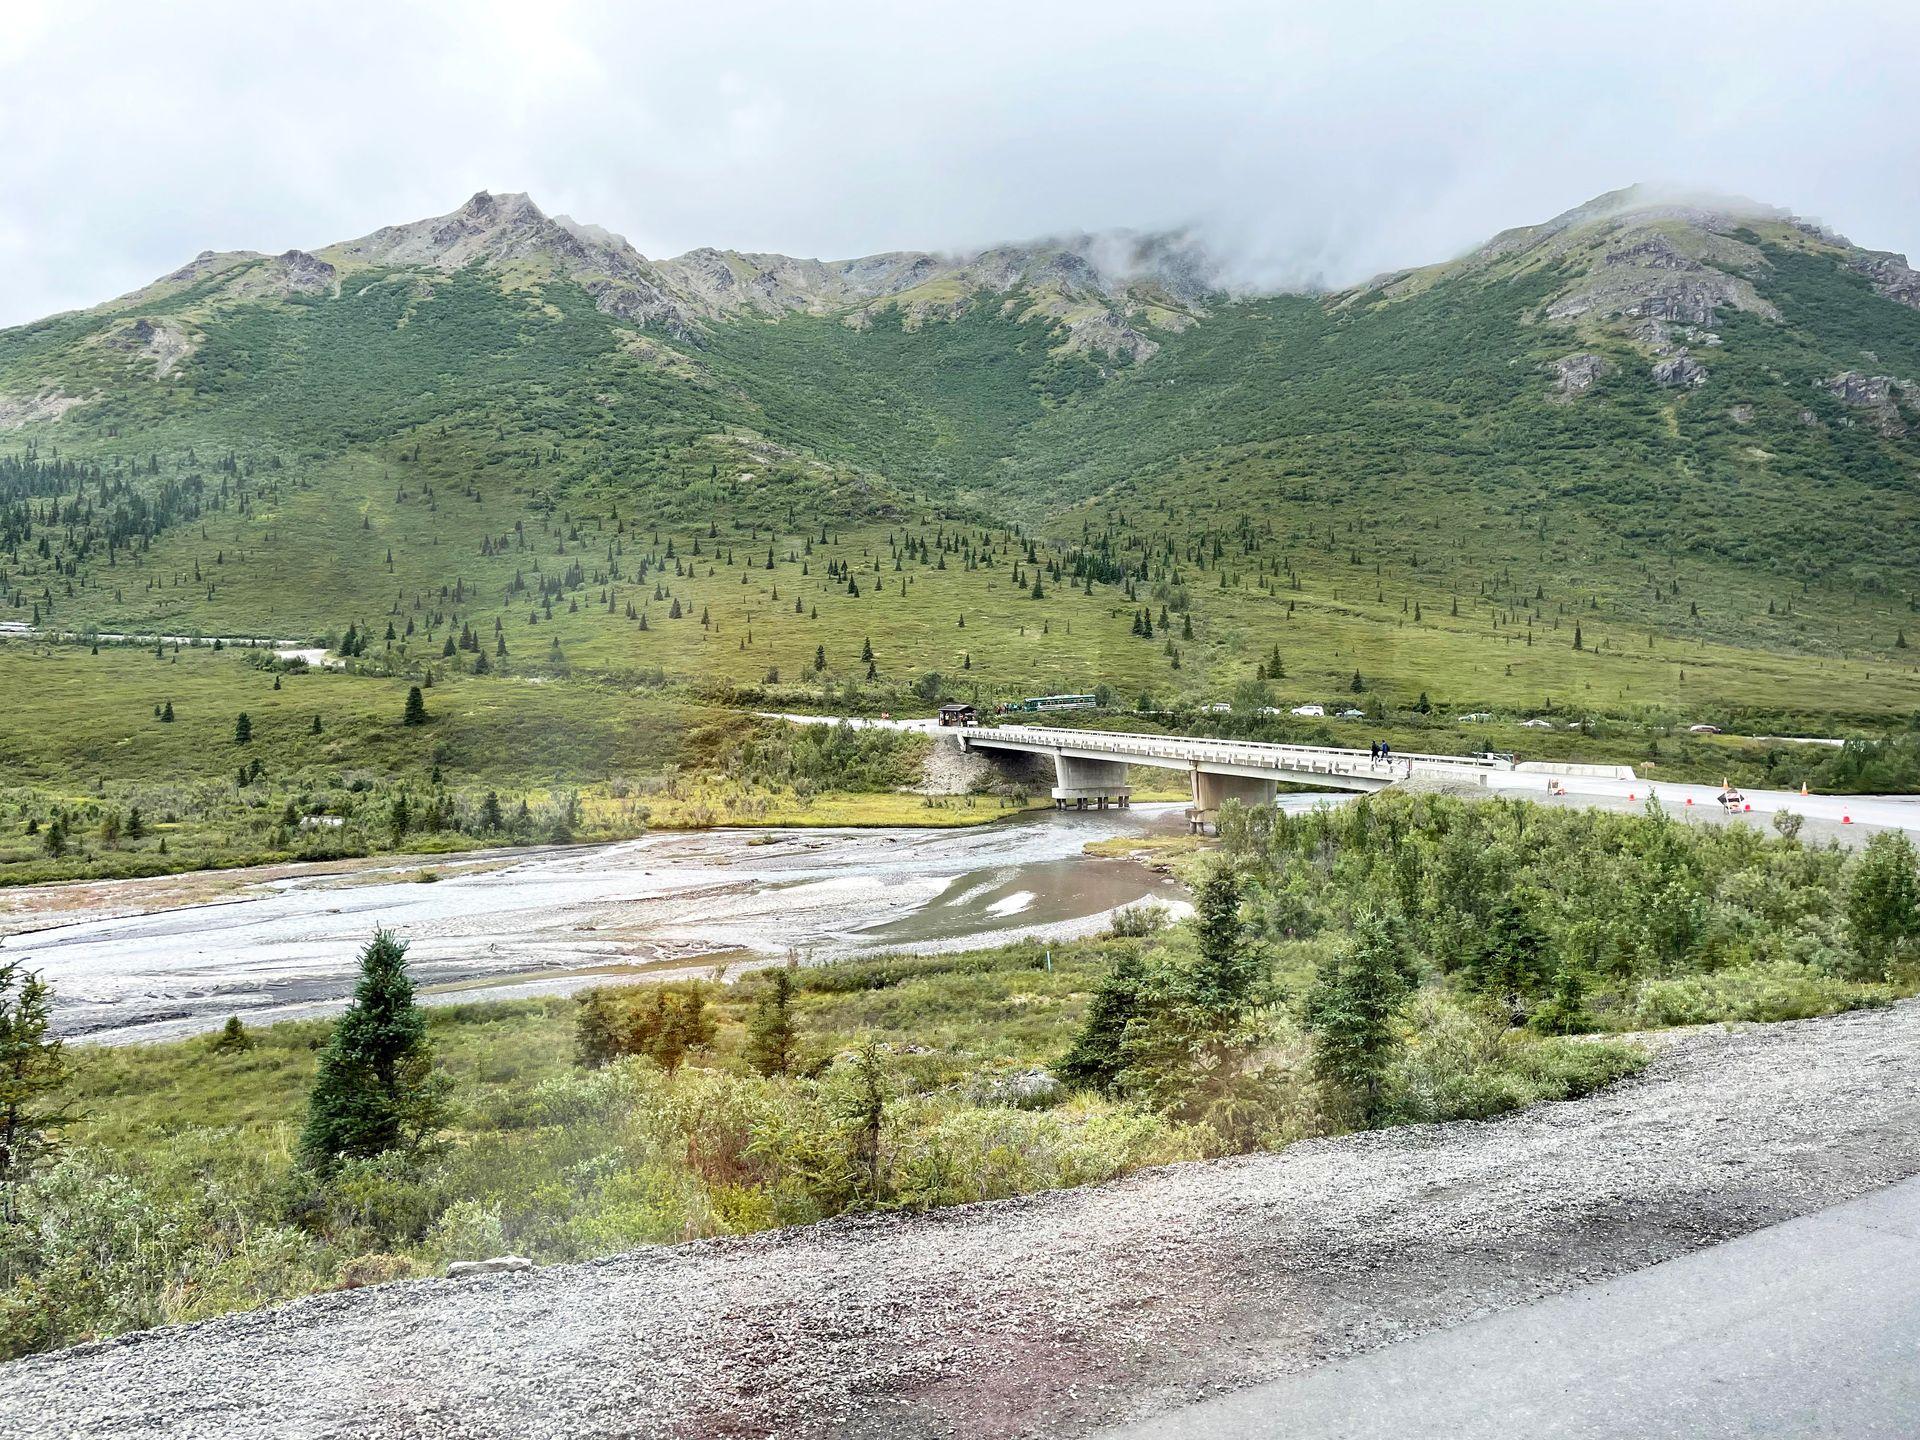 The bridge which private vehicles can make it to in Denali National Park.